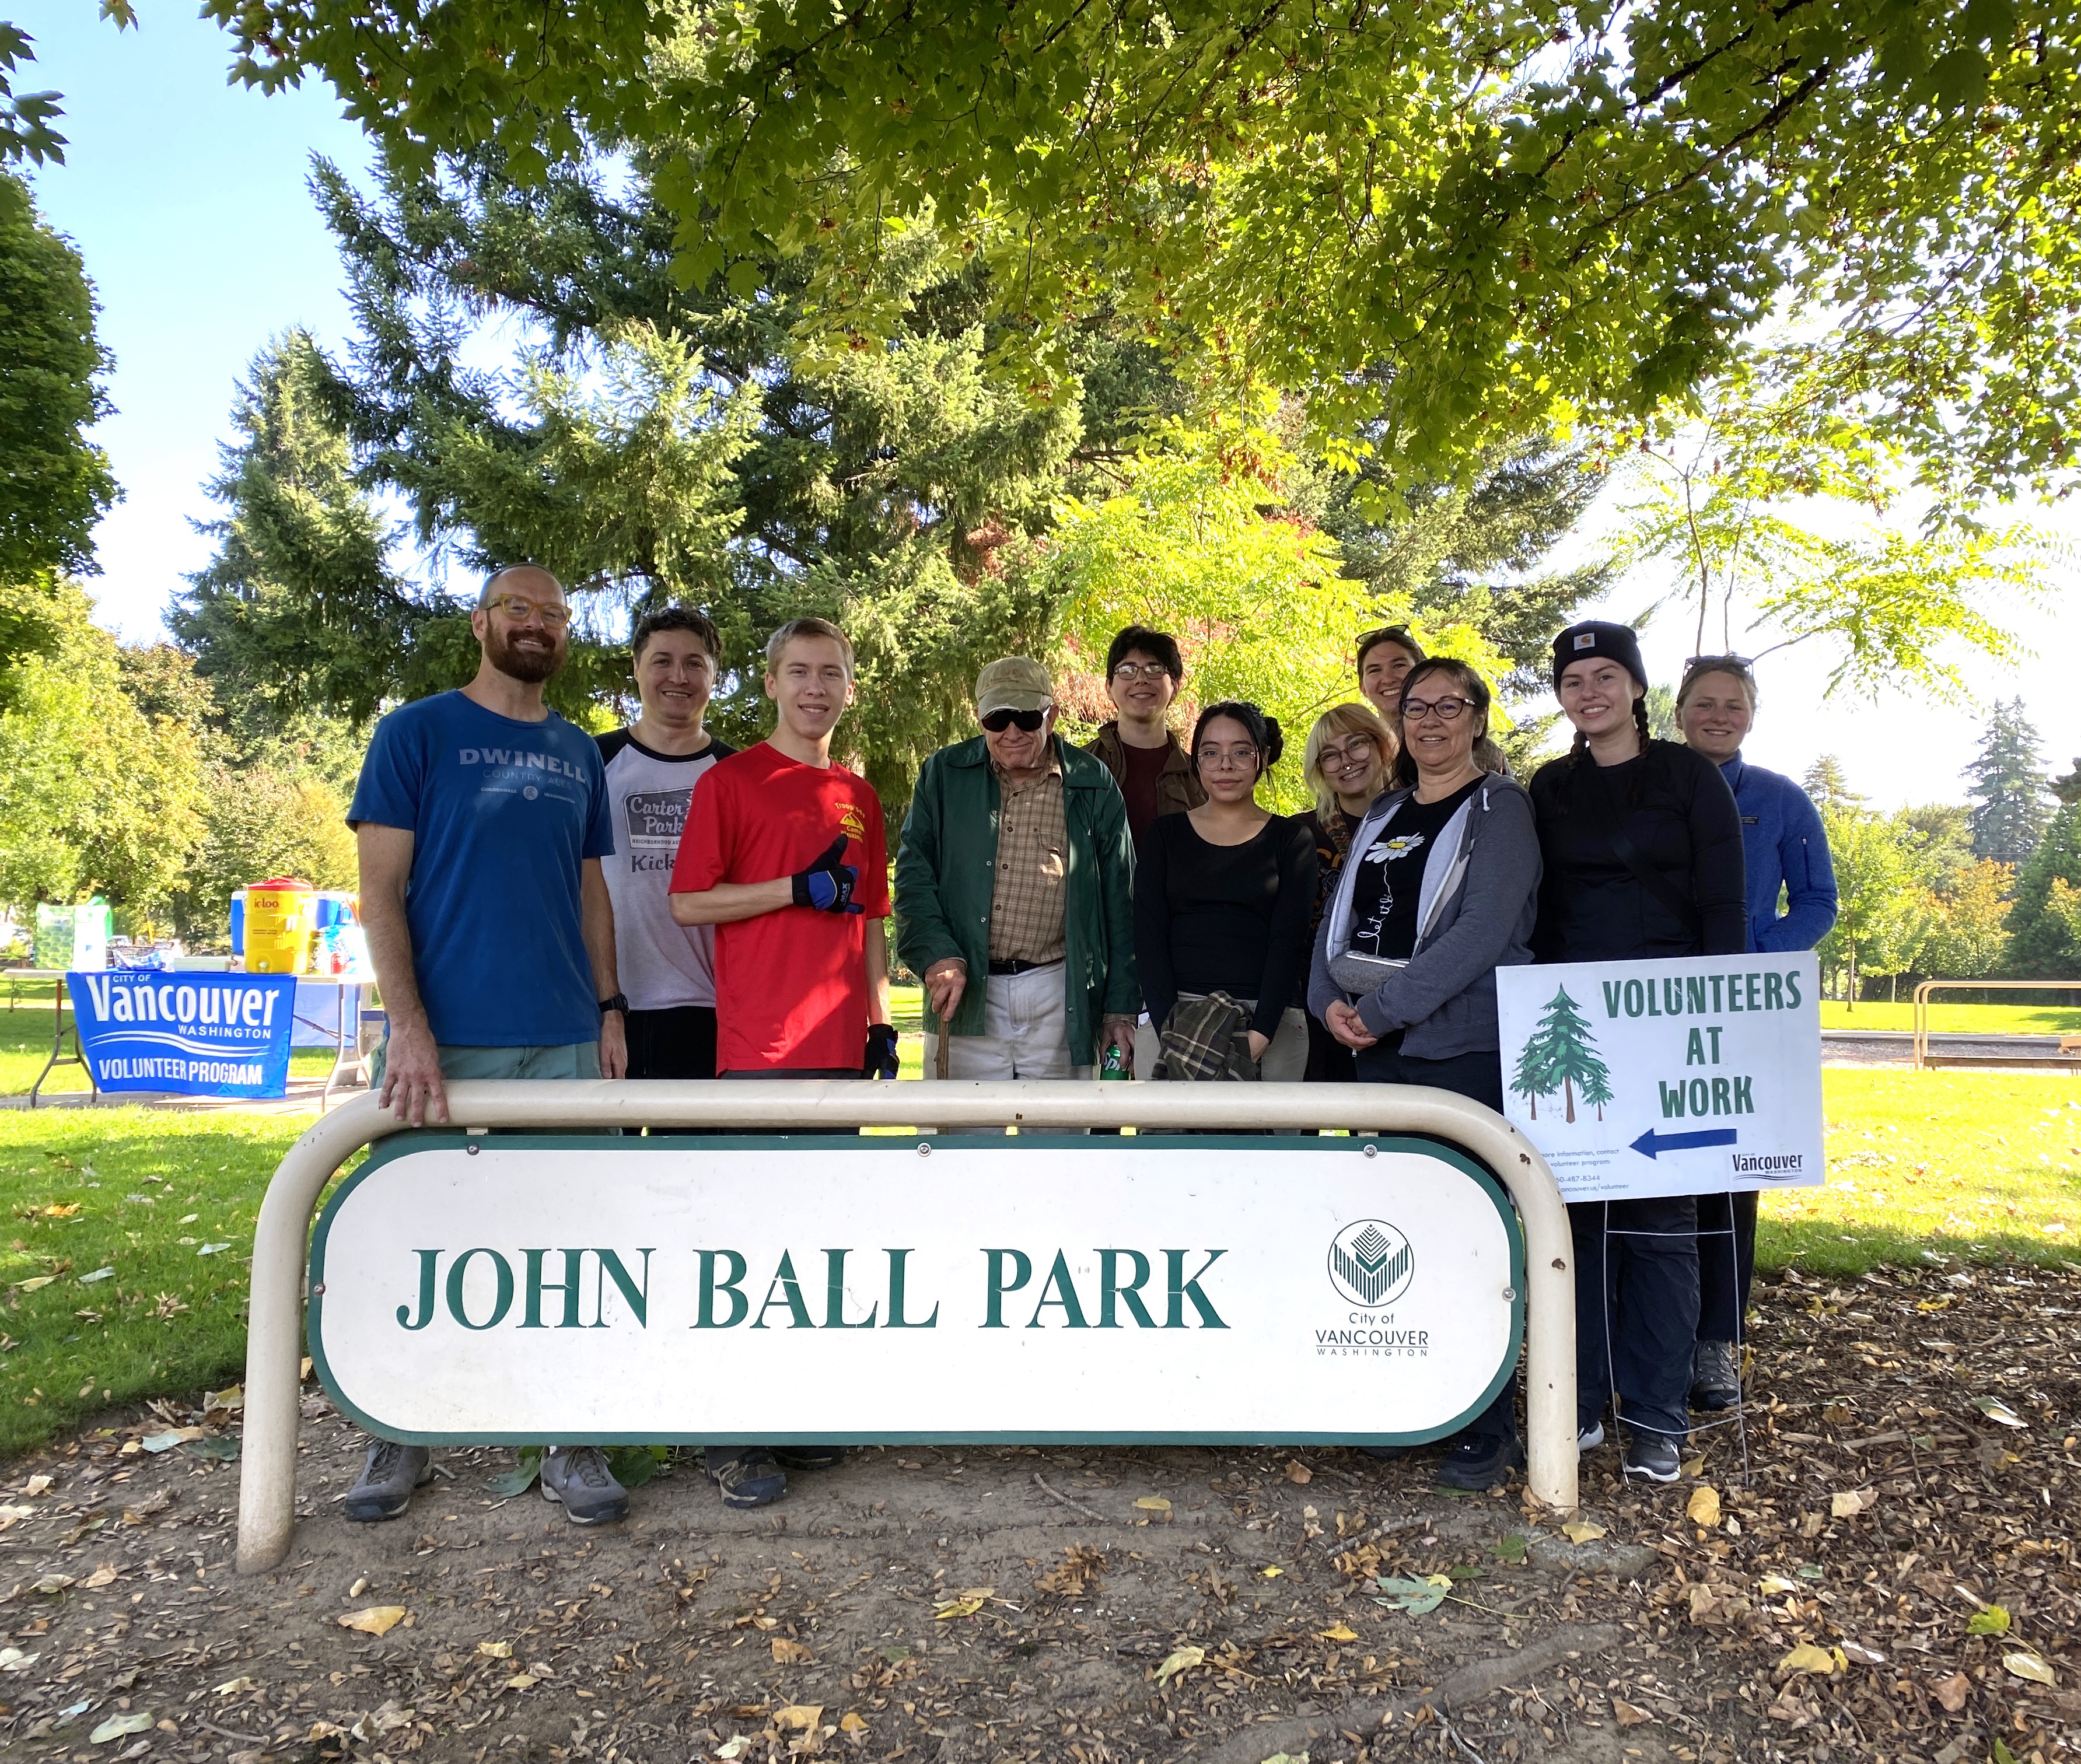 group of volunteers poses around a John Ball Park sign and a Volunteers at Work sign